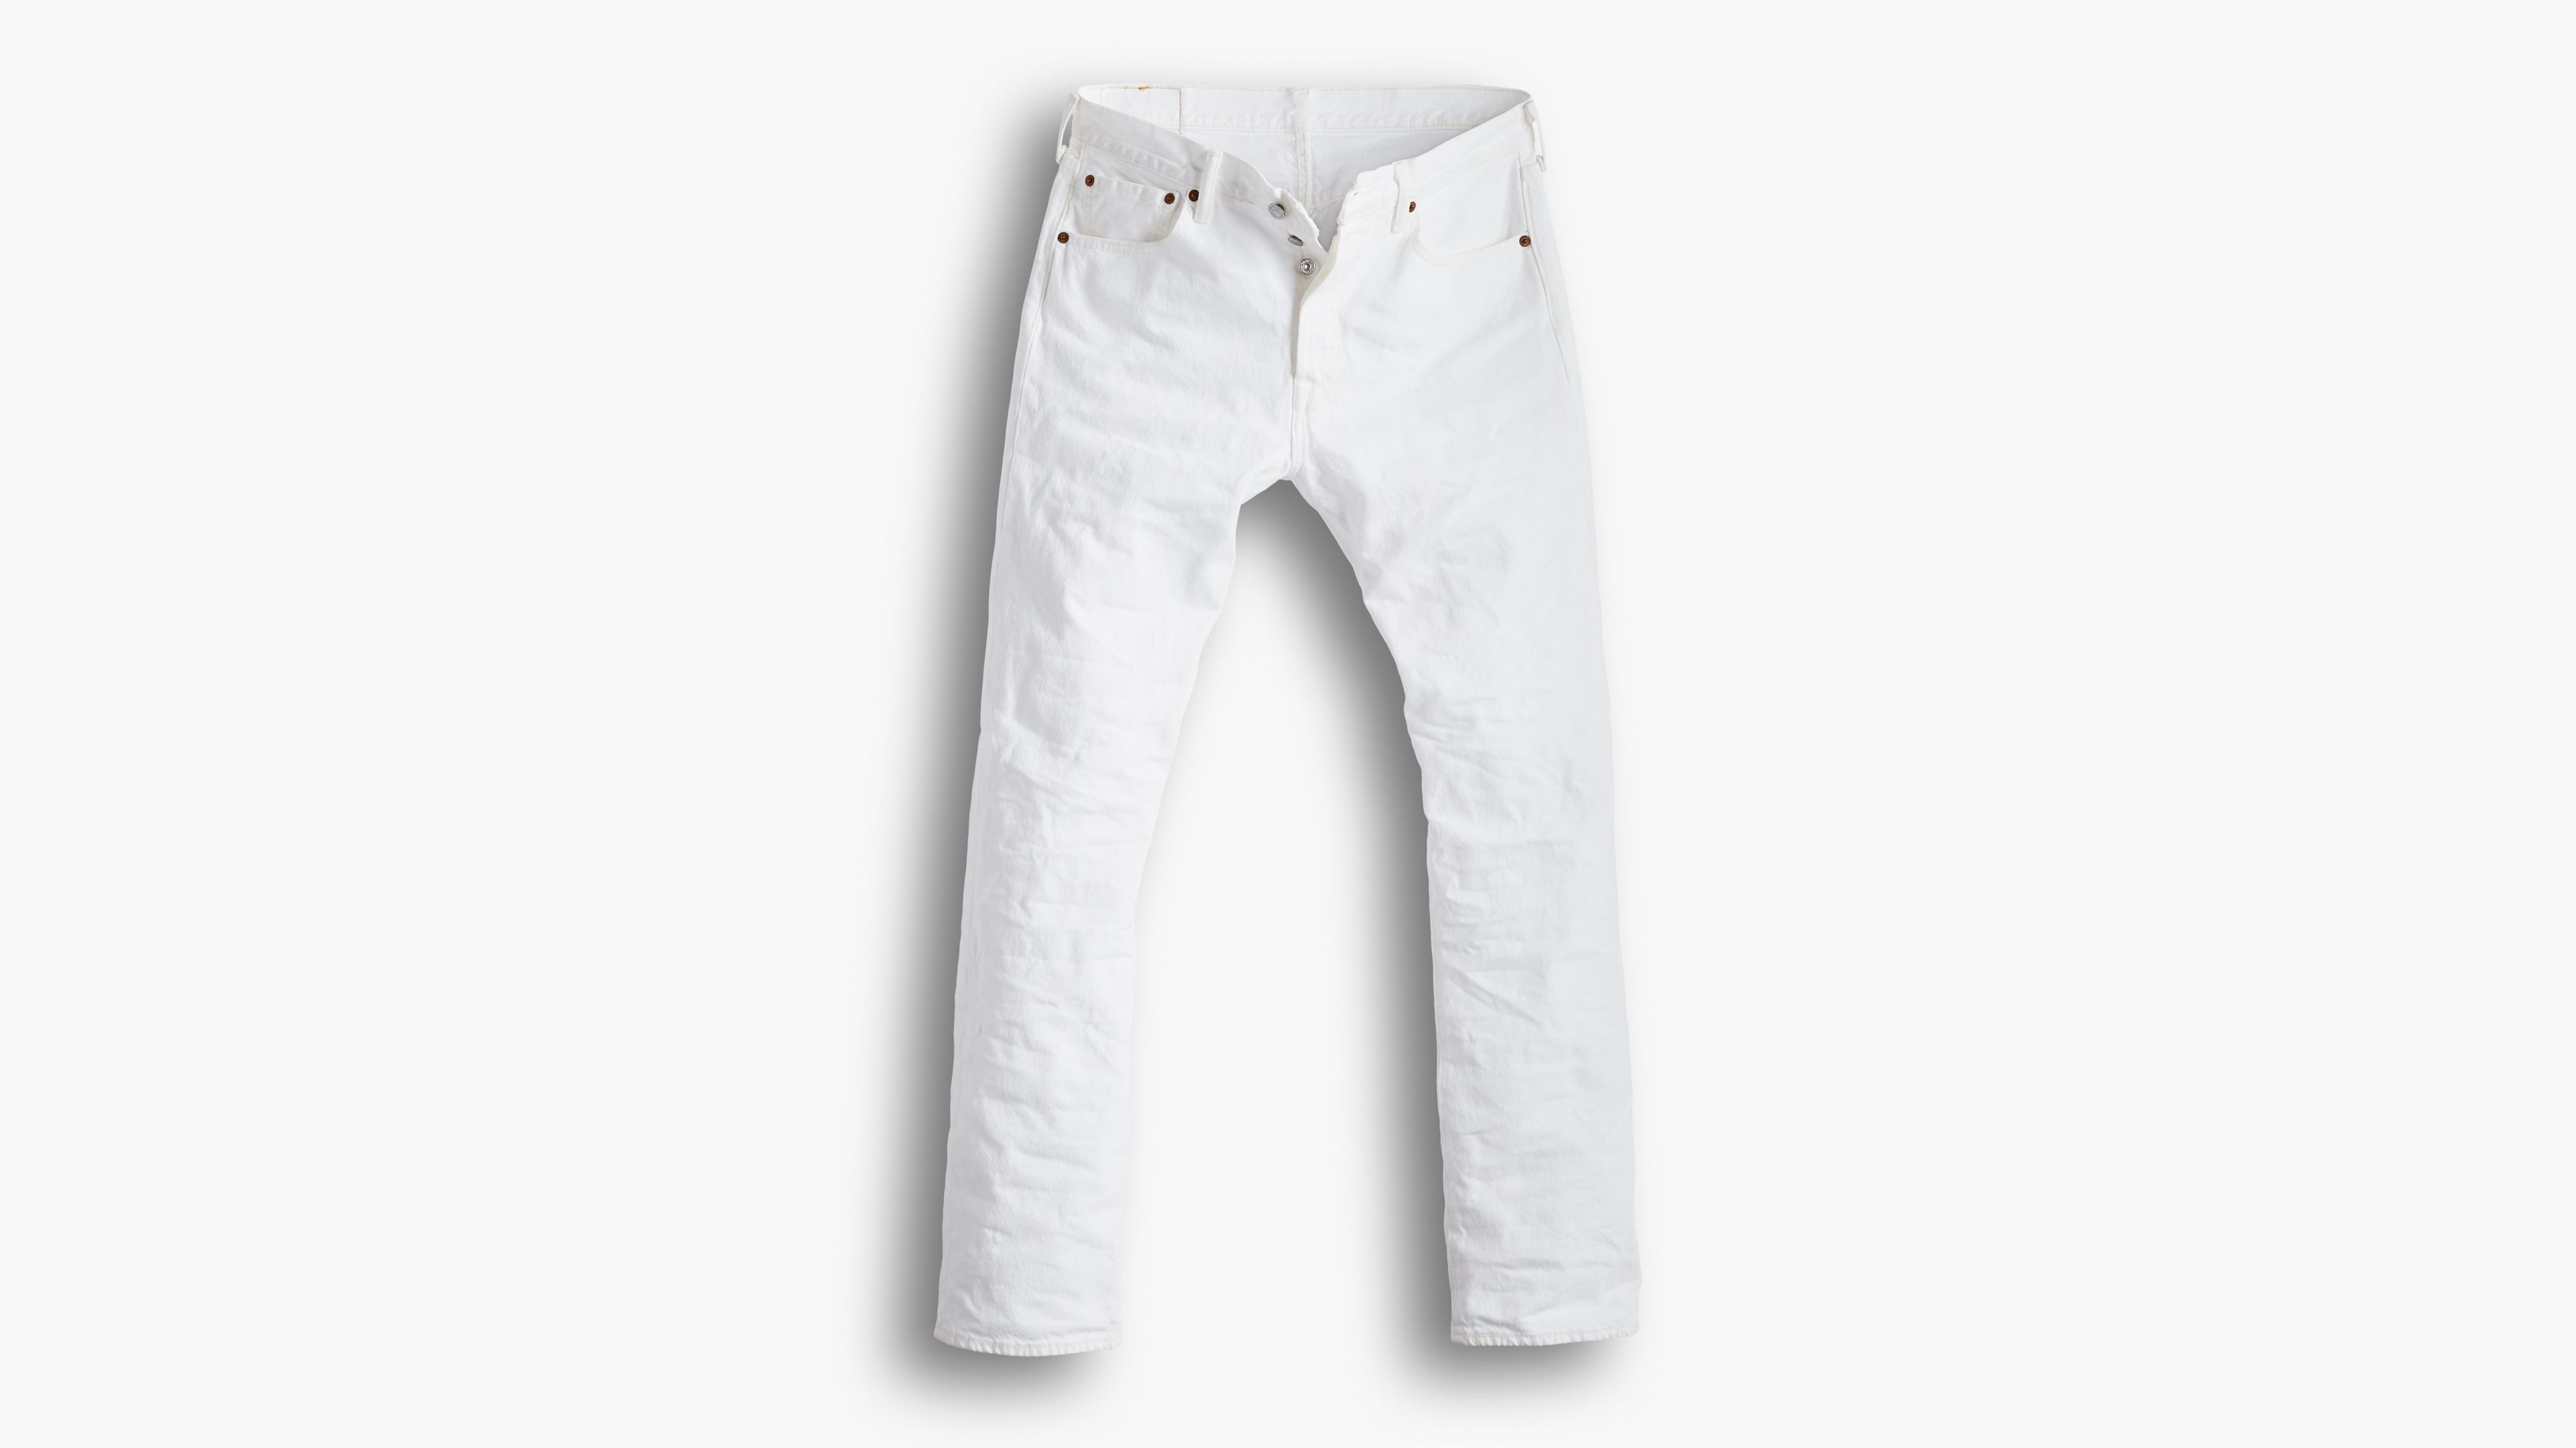 White jeans in winter: GQ Style Guide | British GQ